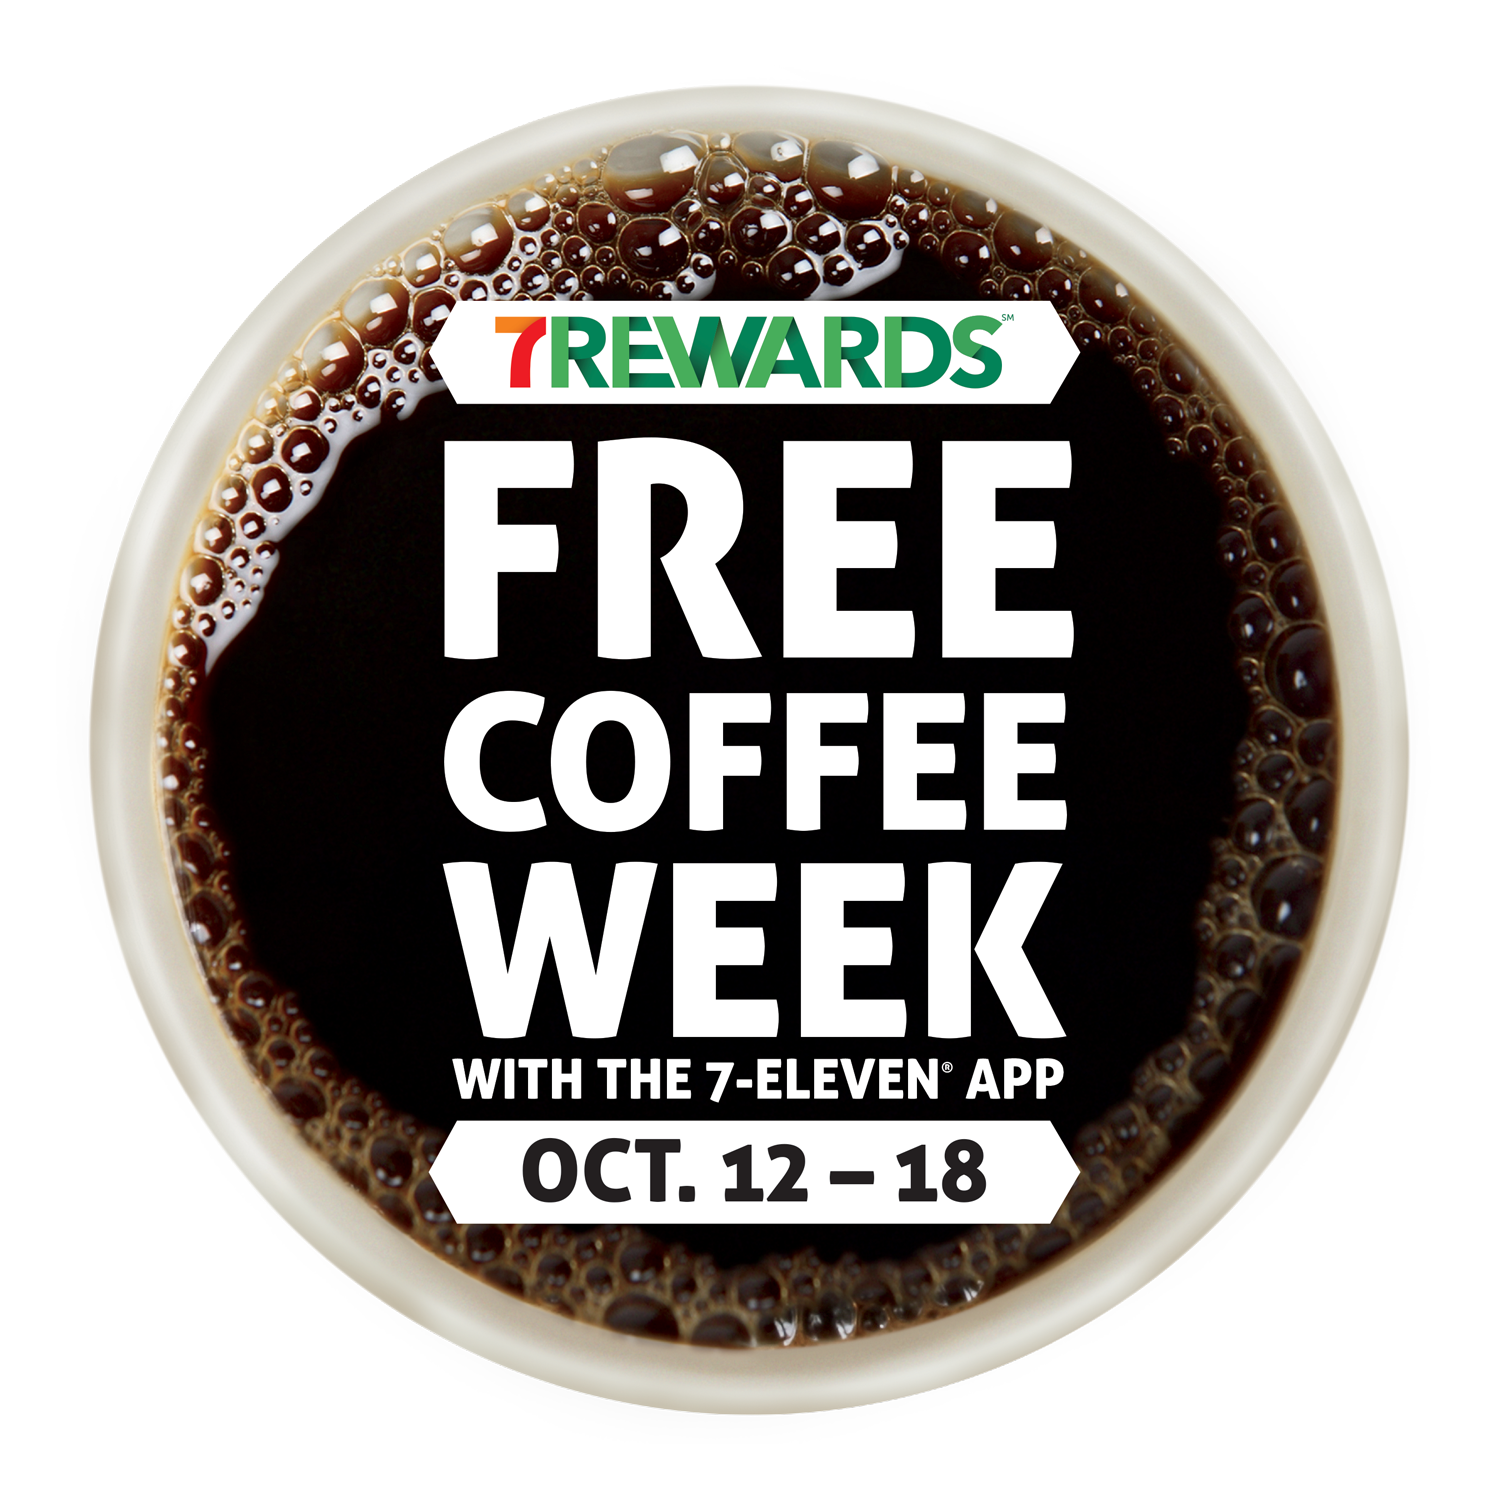 7Rewards™ Free Coffee Week runs from Monday, Oct. 12, through Sunday, Oct. 18, and includes a FREE any-size hot beverage every day through the 7‑Eleven app.